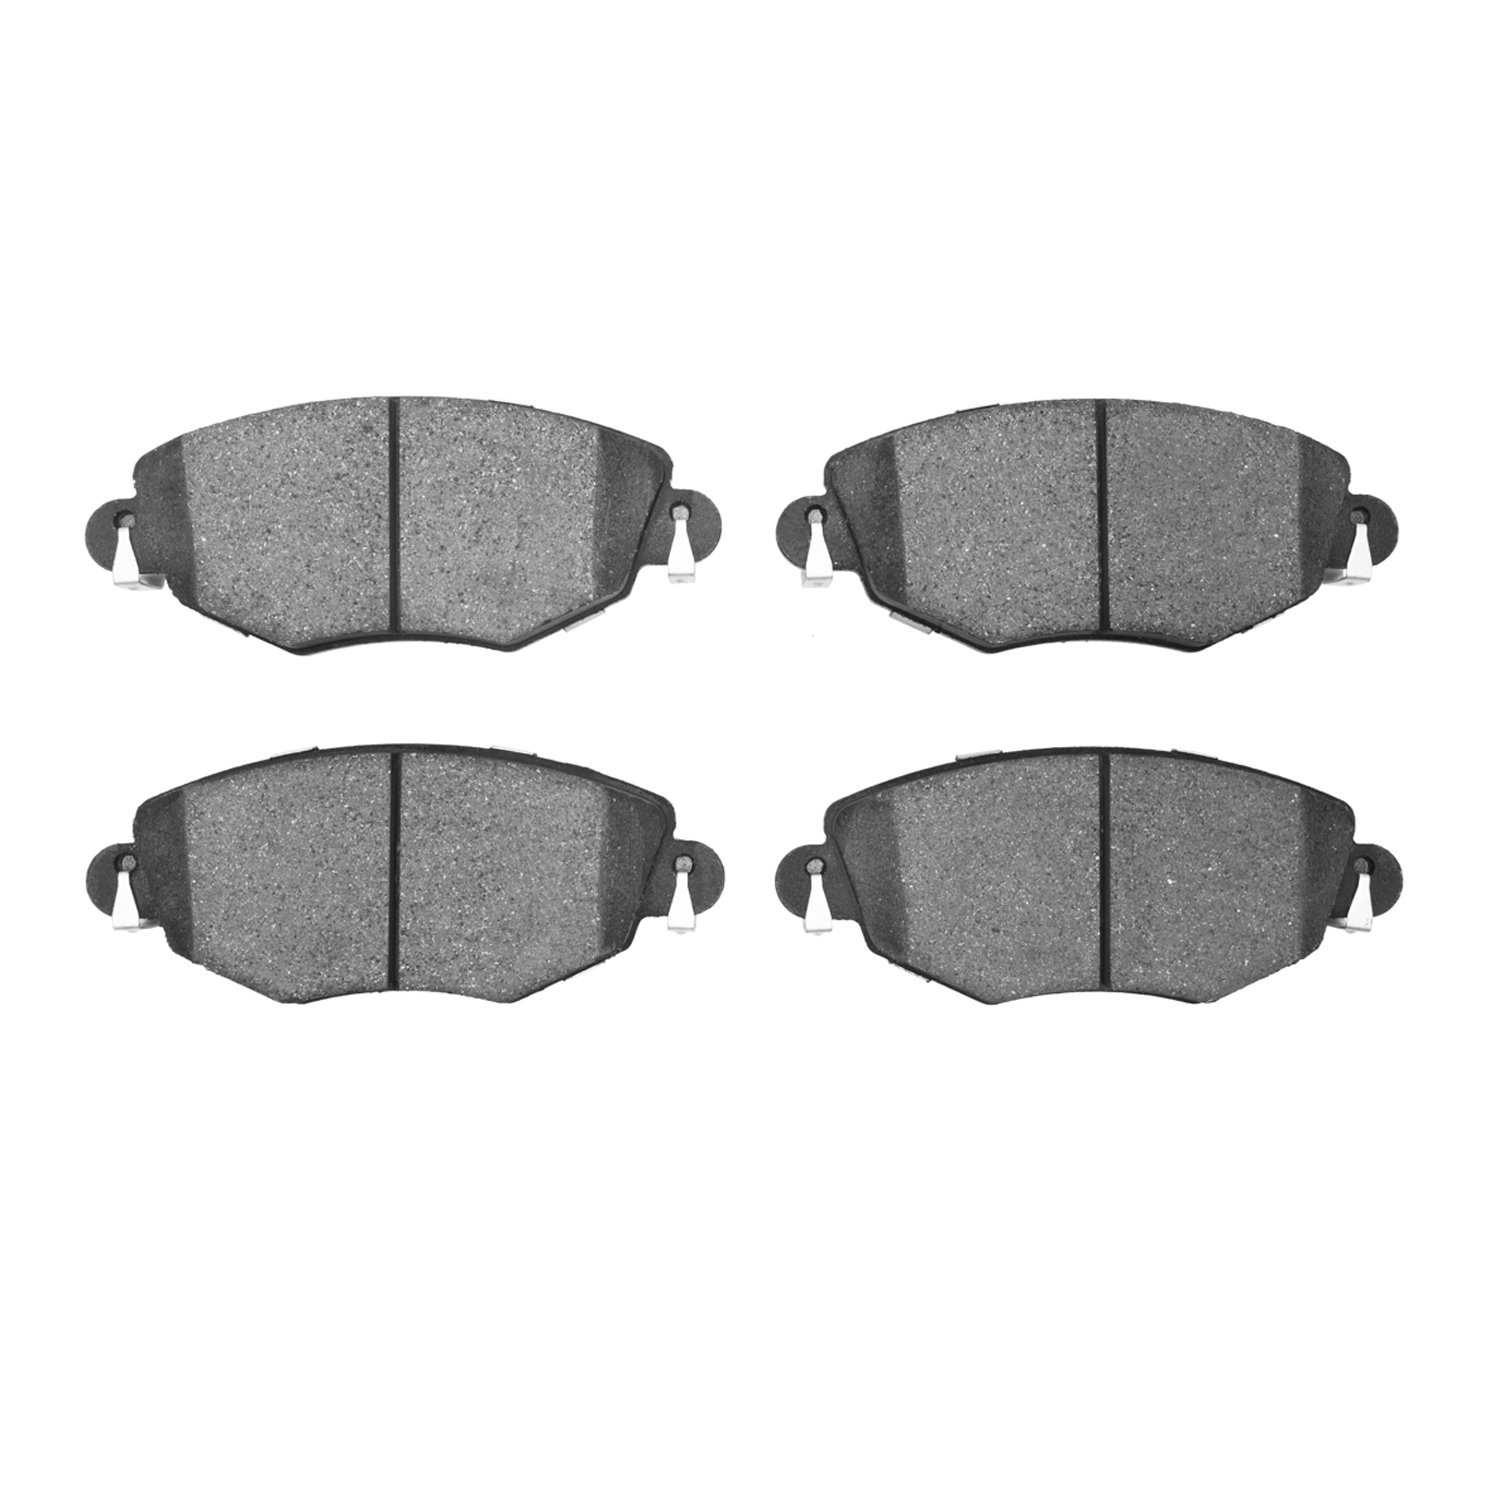 1551-0910-00 5000 Advanced Low-Metallic Brake Pads, 2001-2008 Multiple Makes/Models, Position: Front